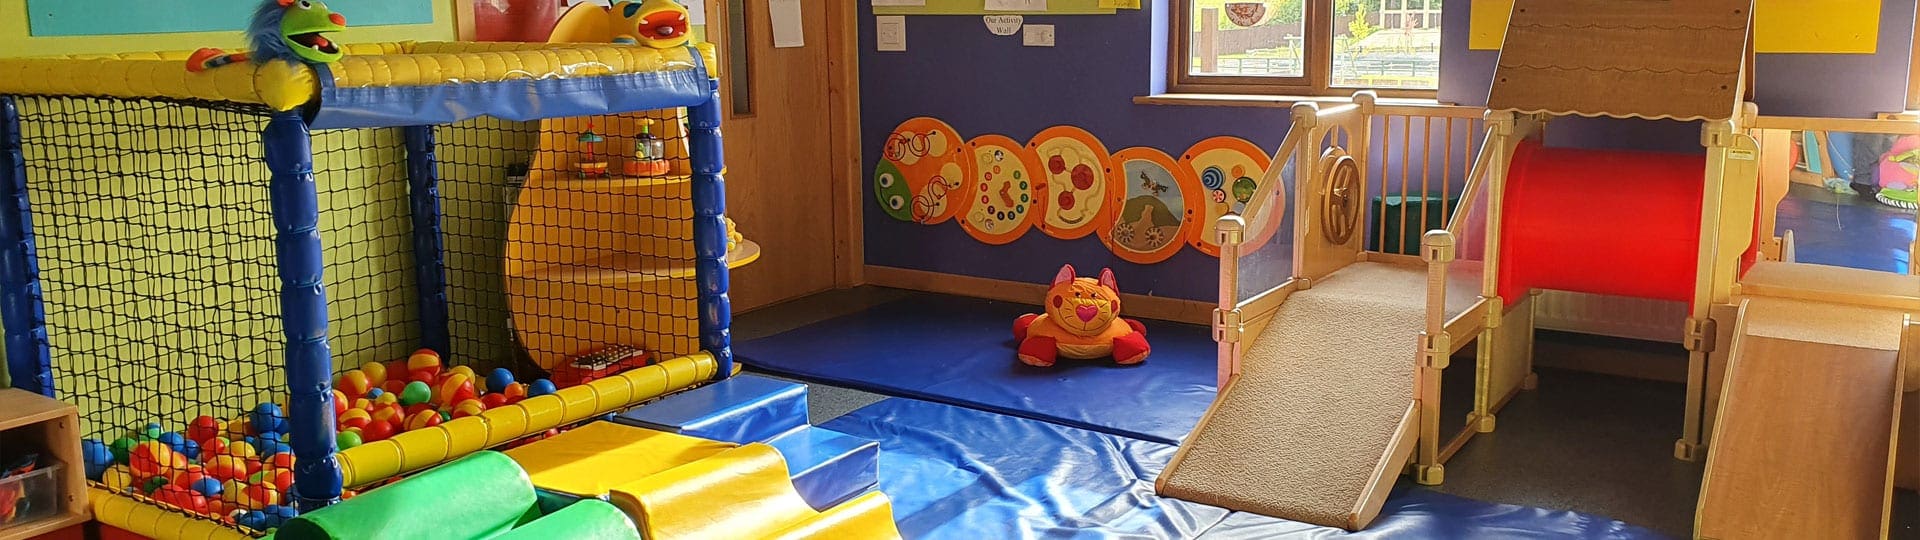 Wobblers Room High Quality Banner Childcare Mellowes